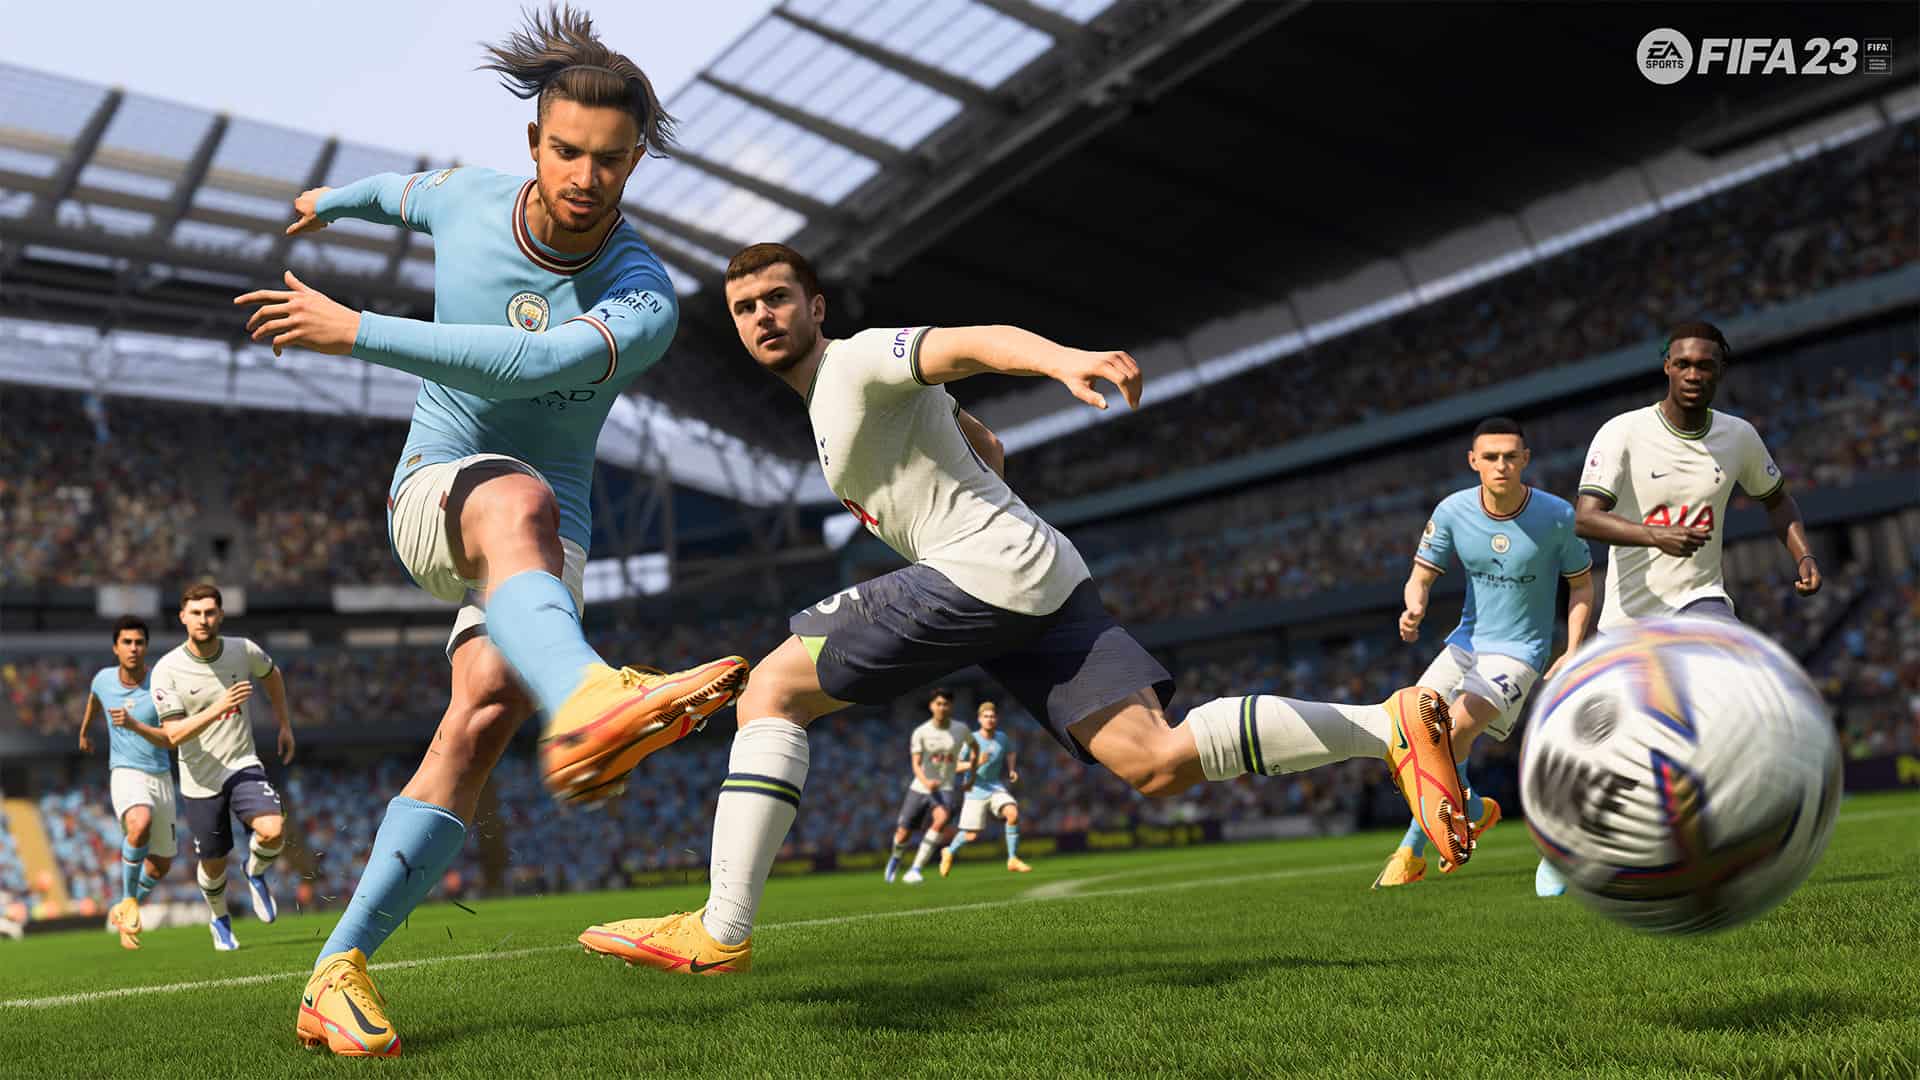 FIFA 23 will include cross-play, women’s club football and more, launches September 30